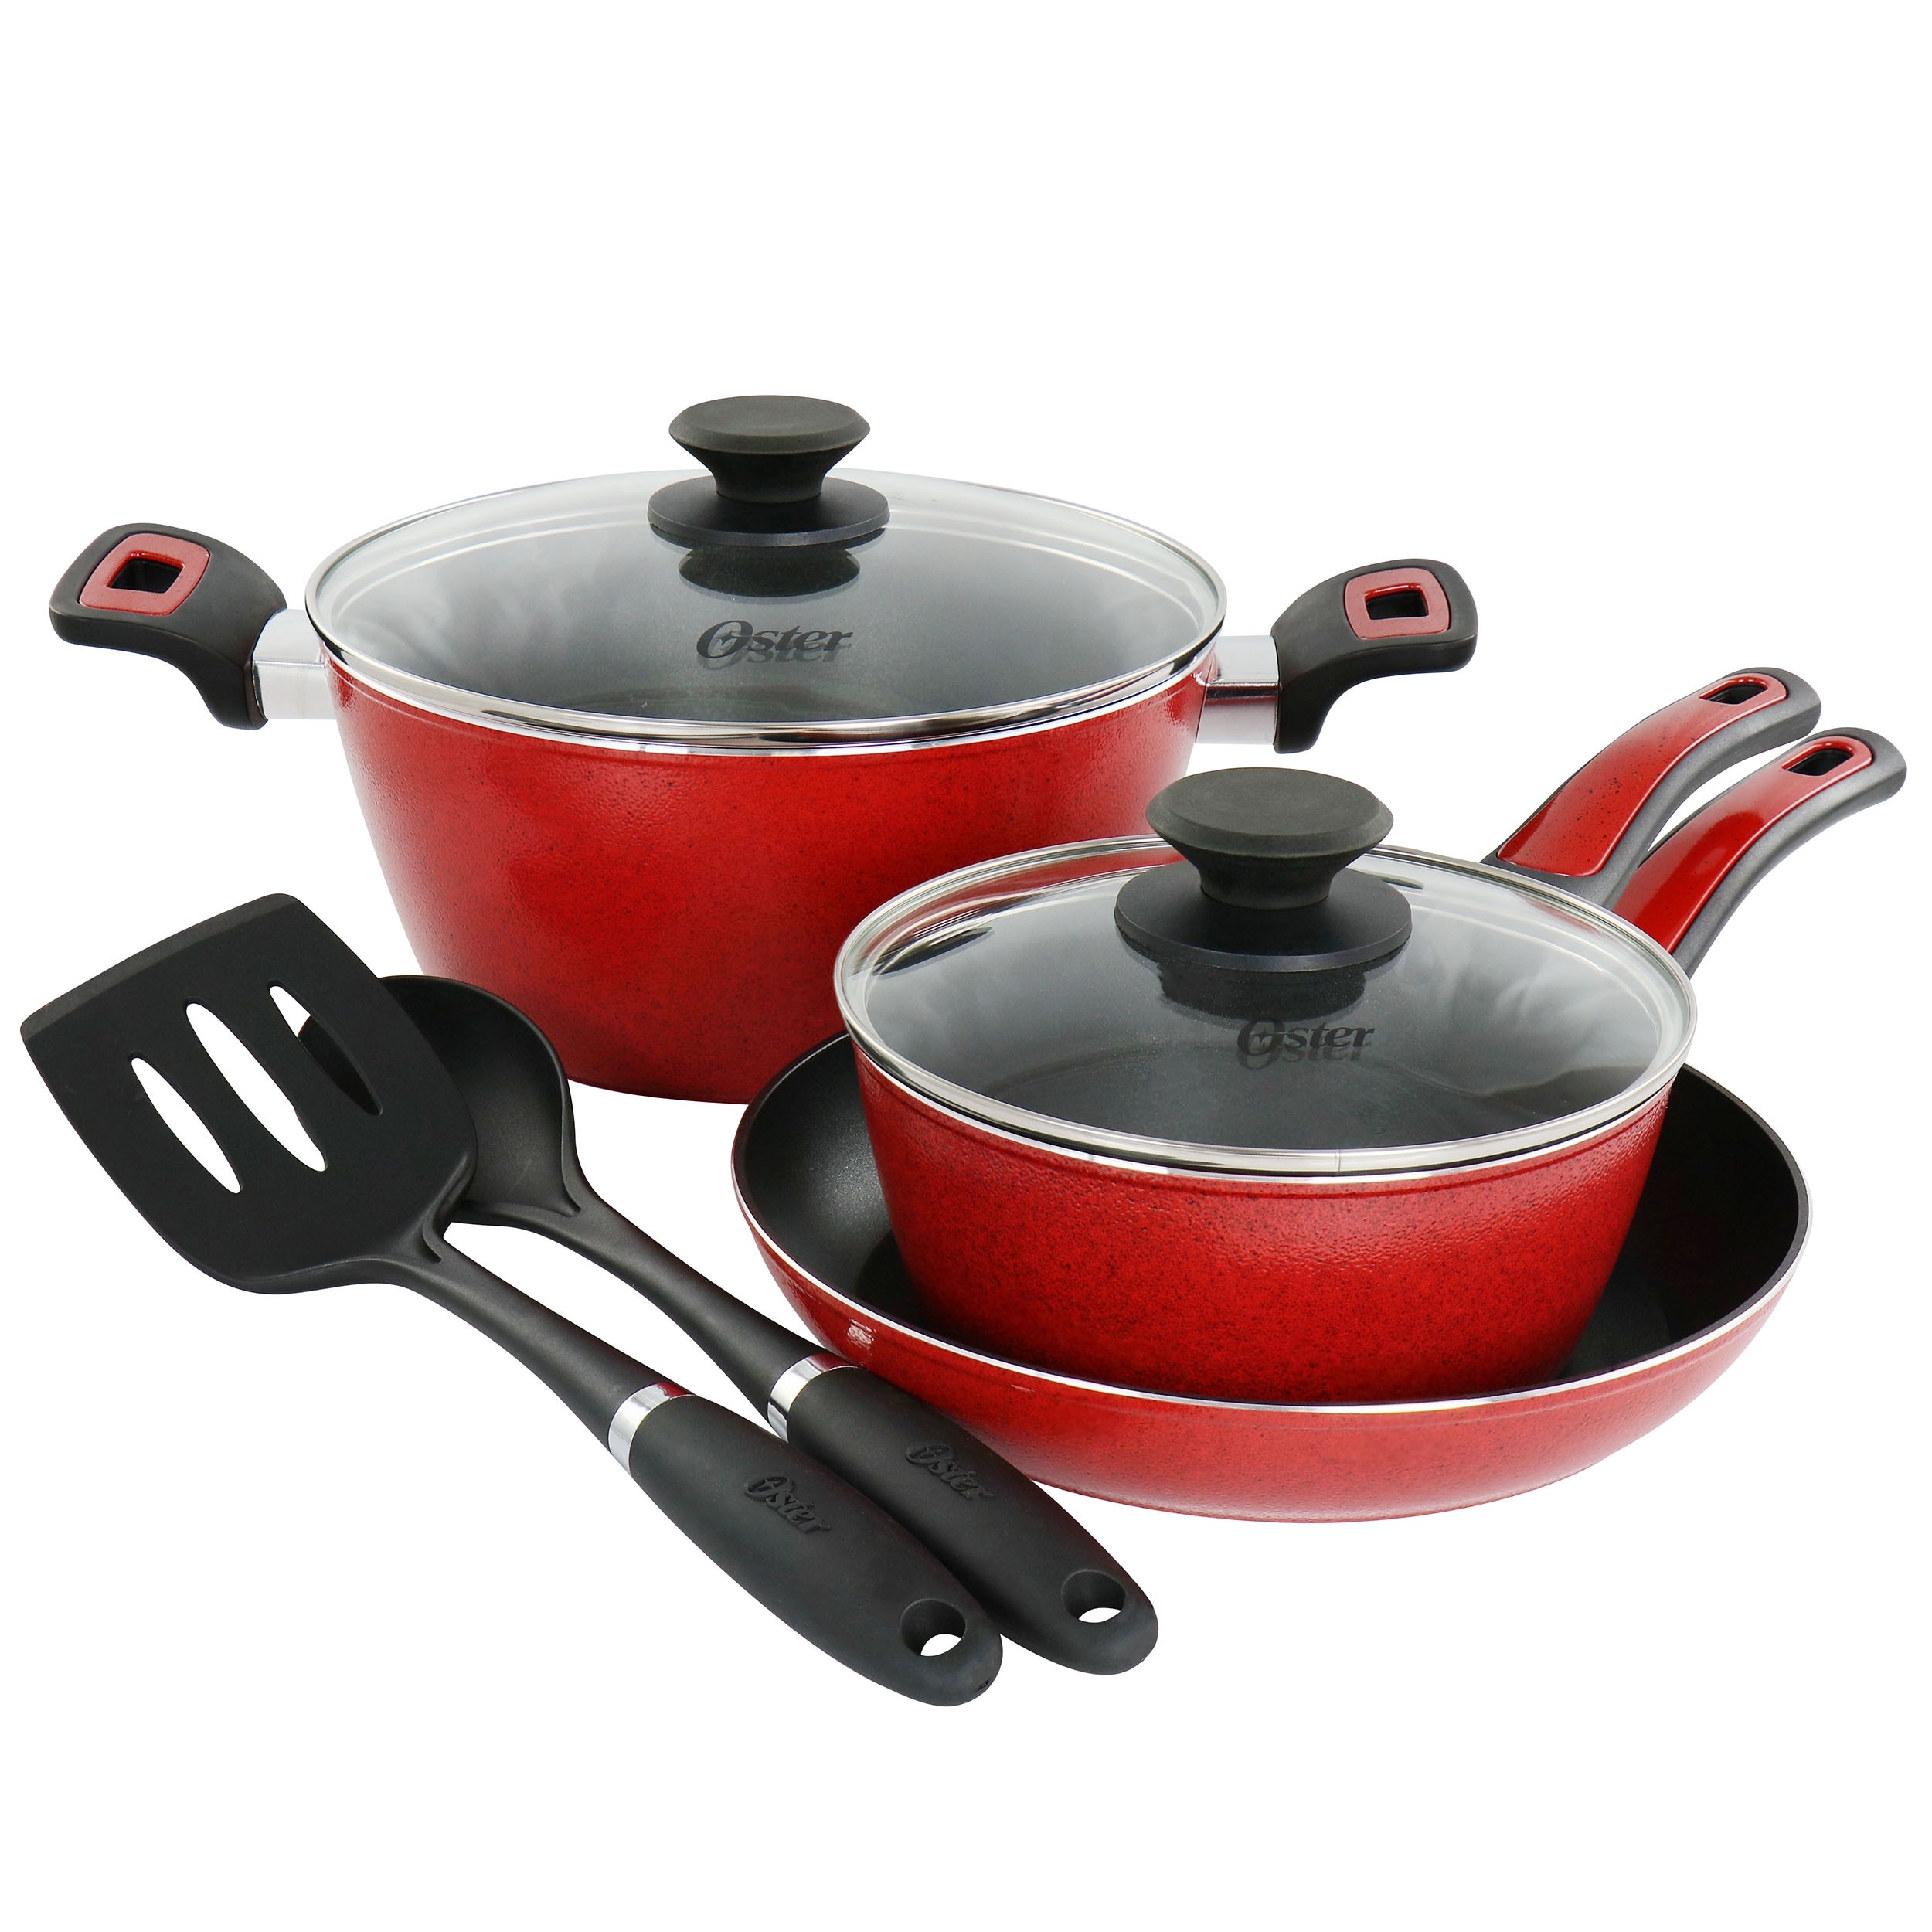 https://ak1.ostkcdn.com/images/products/is/images/direct/fd10232cafceb4c74c1146e7264ad16ec3a37a29/Oster-Claybon-7-Piece-Non-Stick-Aluminum-Cookware-Set-in-Red.jpg